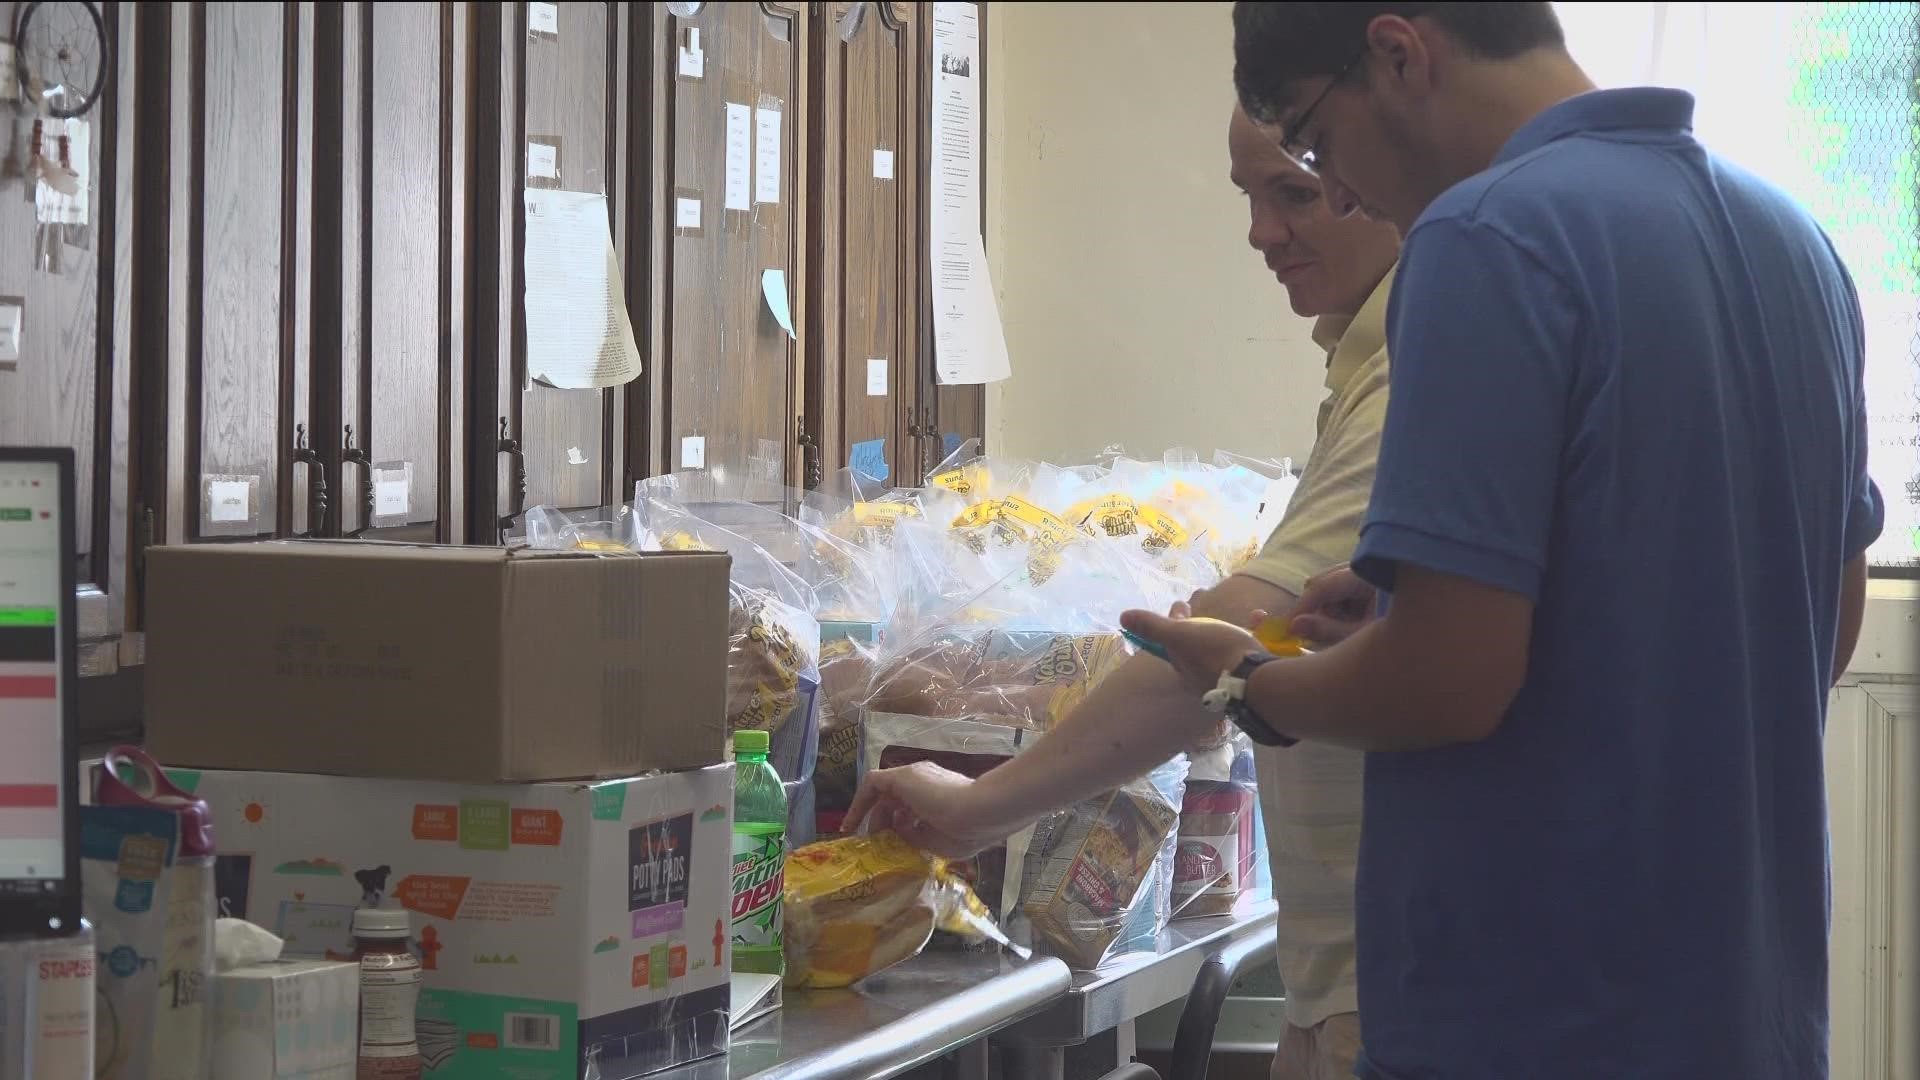 The Southside Life Station is the only food pantry in Toledo that delivers groceries directly to homes. The funding will cover 30% of their yearly budget.